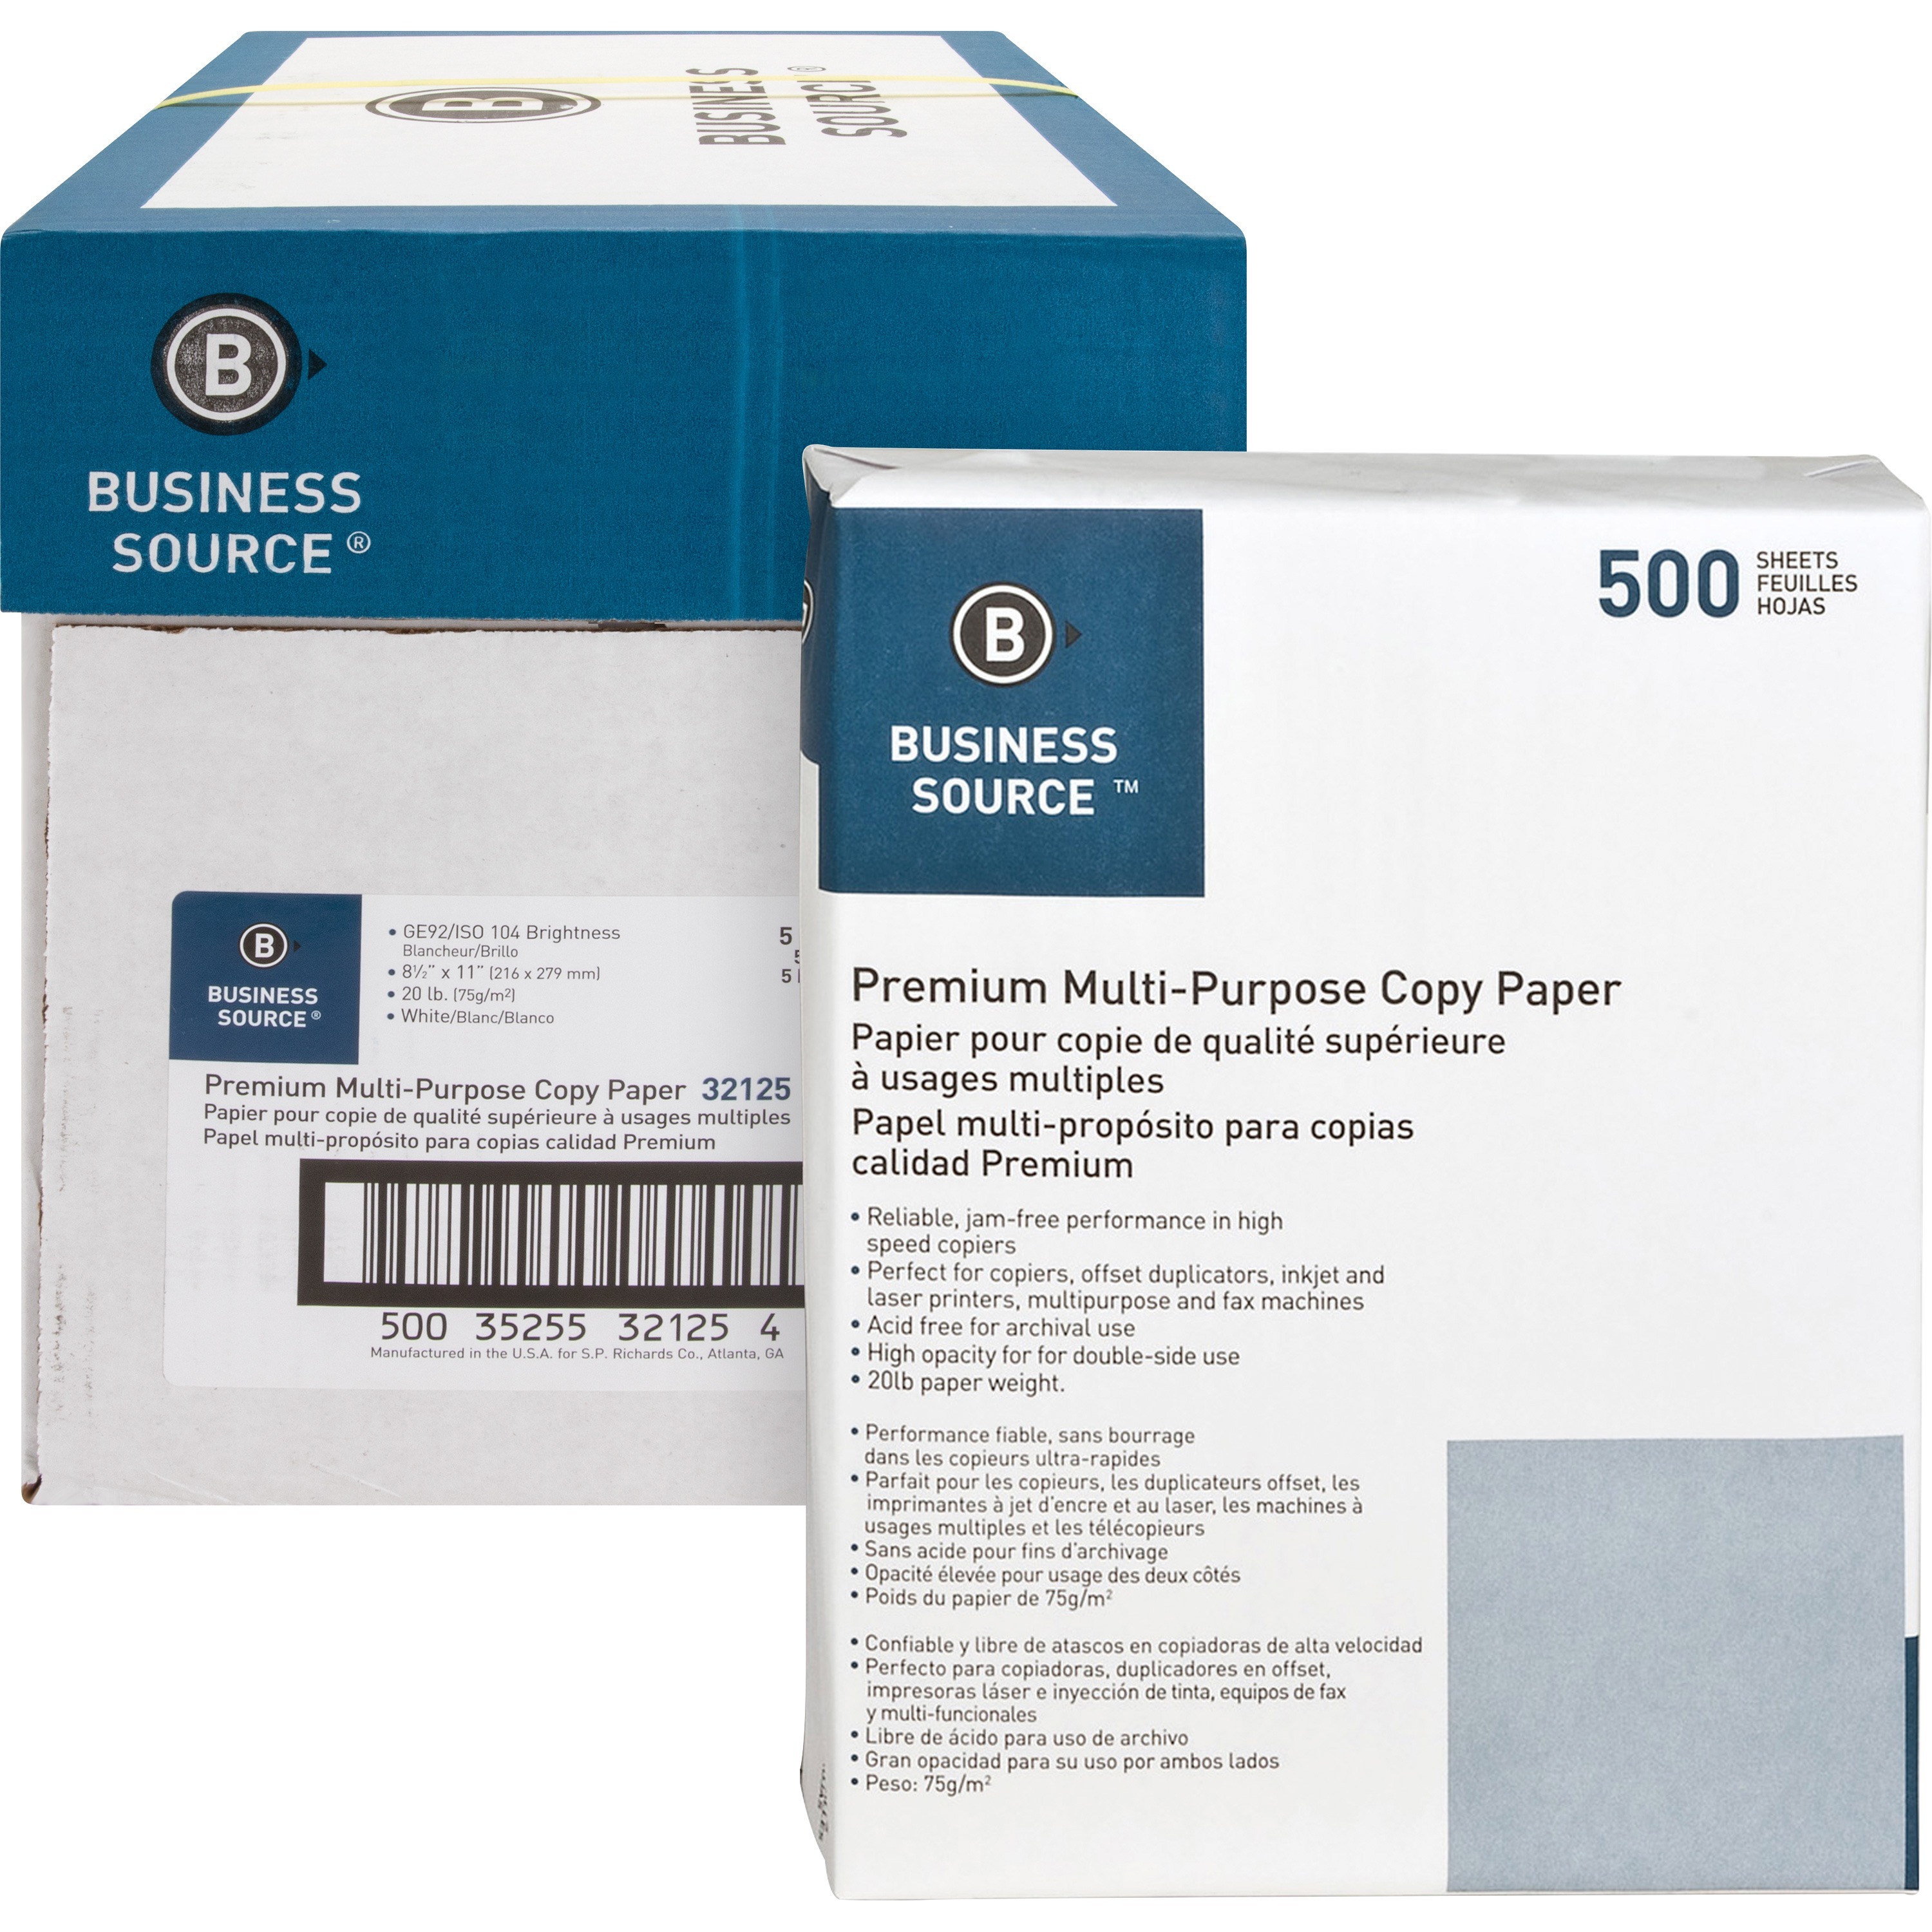 Sparco Perforated Blank Computer Paper - 8 1/2 x 11 - 20 lb Basis Weight  - 230 / Carton - Perforated - White